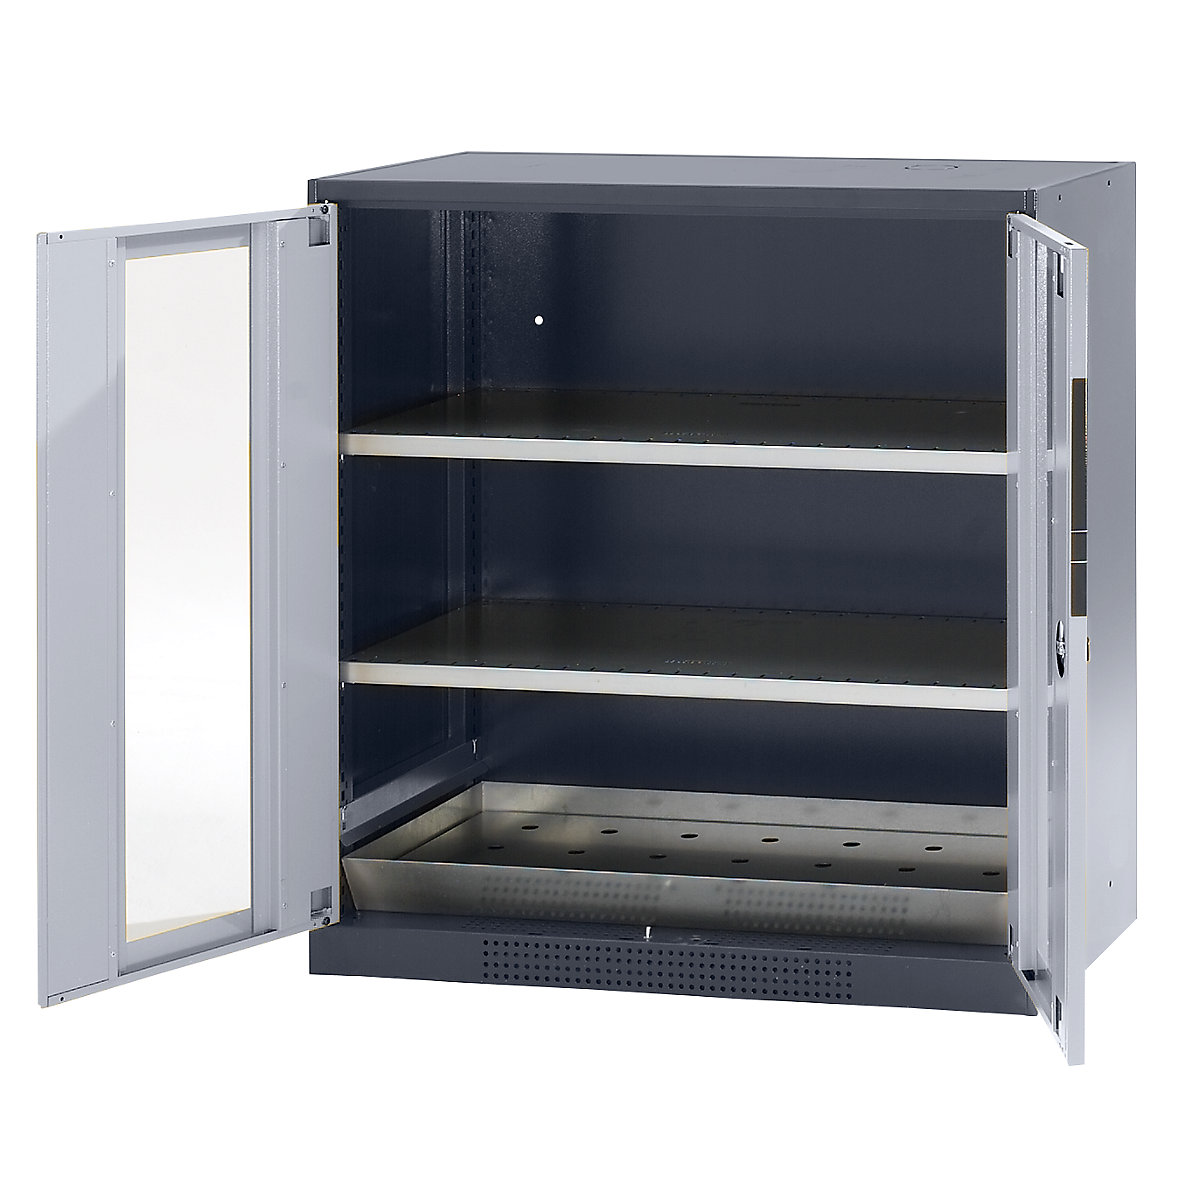 Laboratory chemical storage cupboard – asecos, 2 door, half height, 2 shelves, with vision panel, grey-1